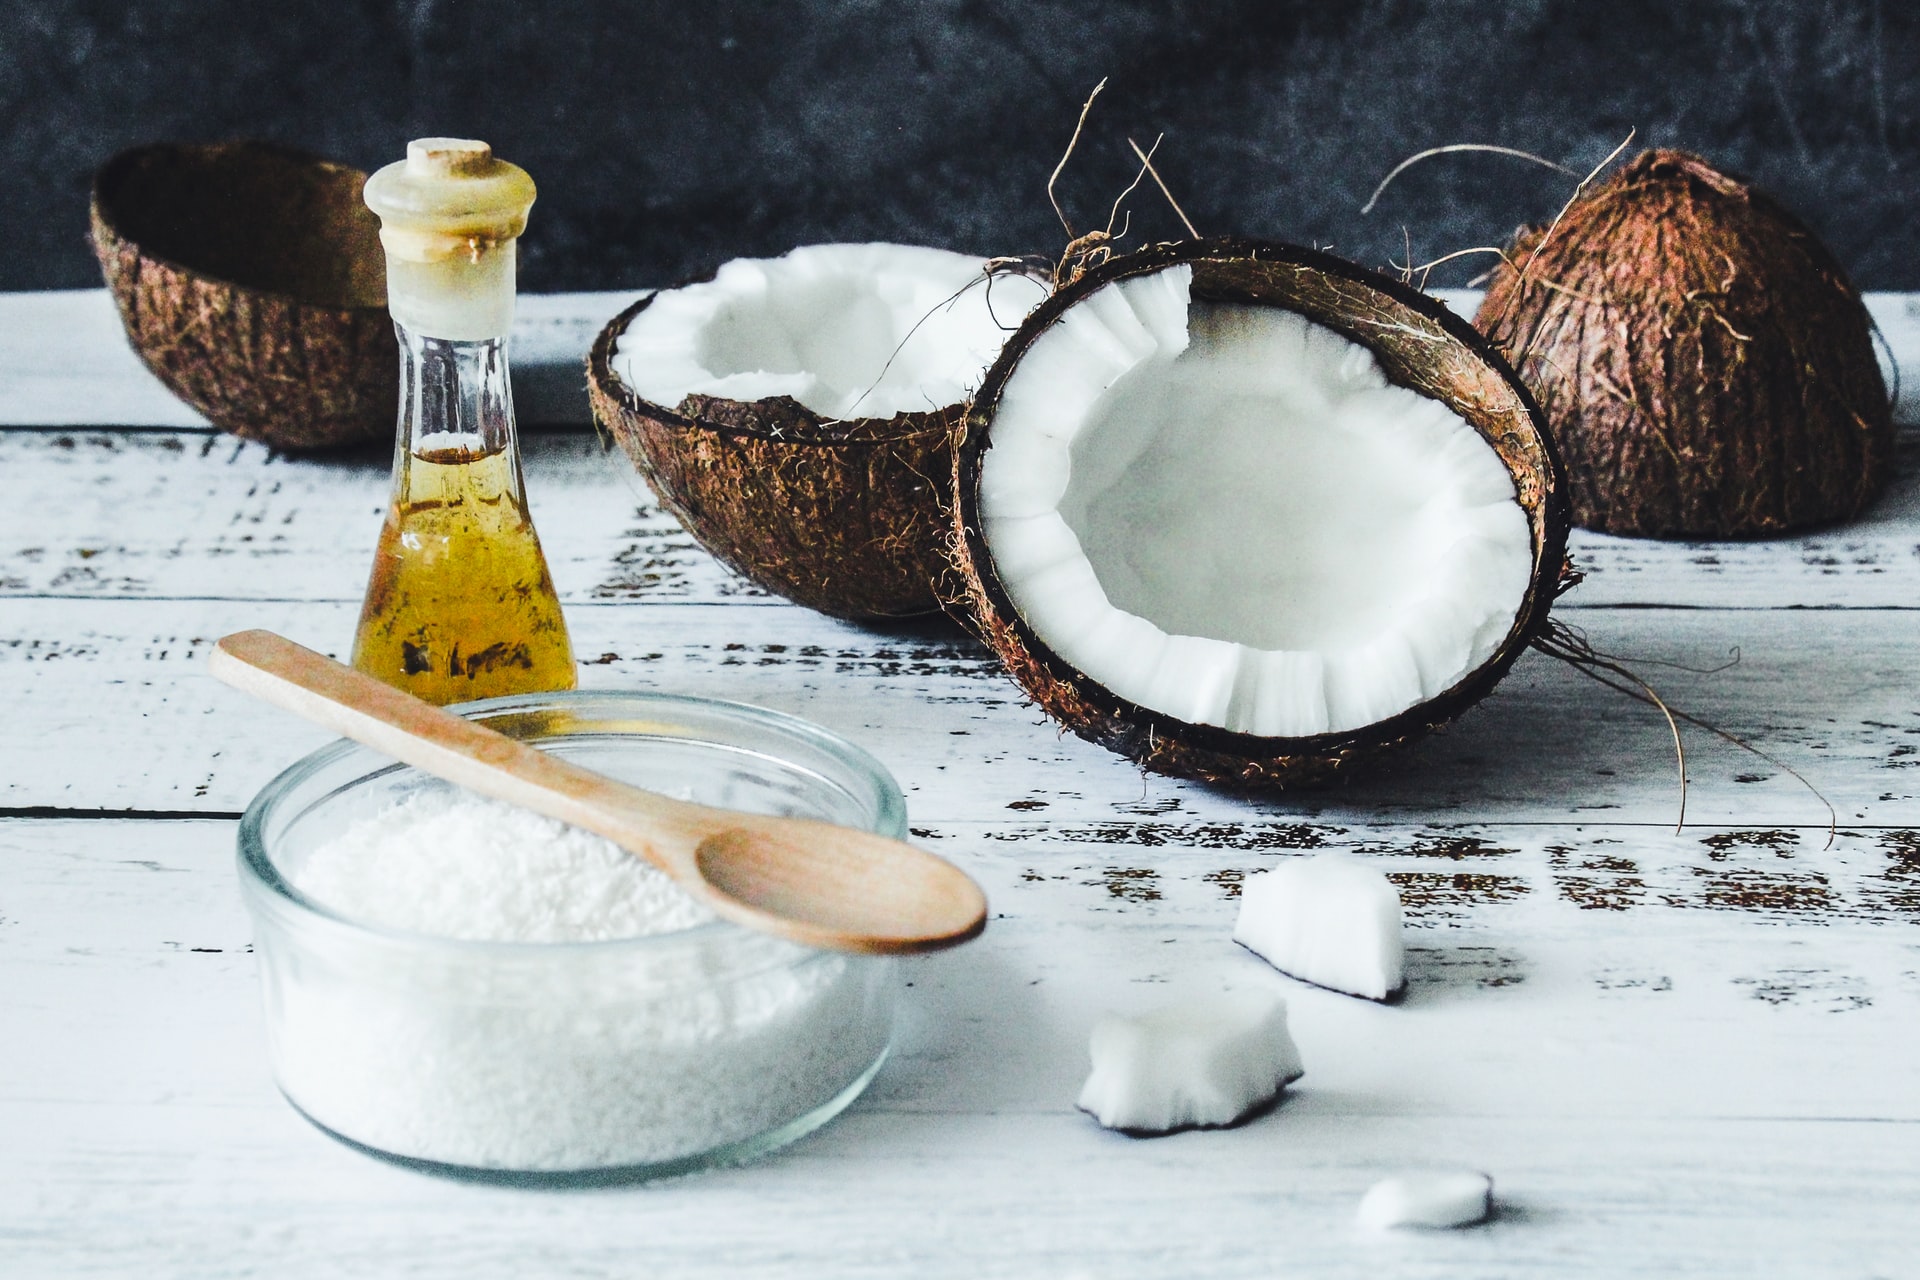 Coconut oil for wrinkles – does it work?